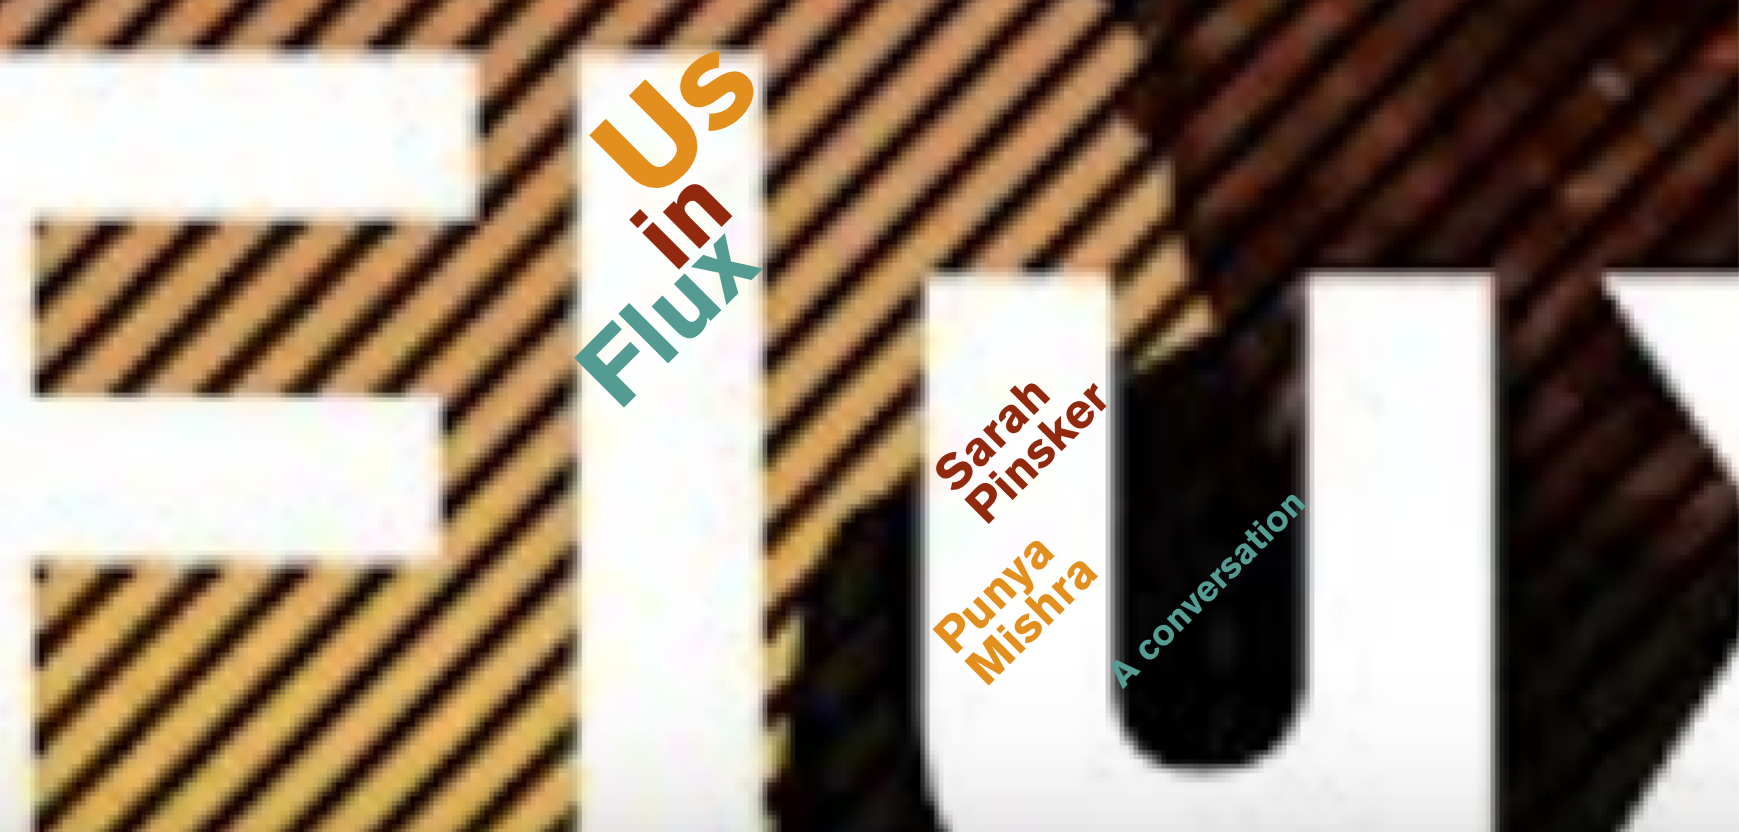 Us in Flux: A conversation with Sarah Pinsker